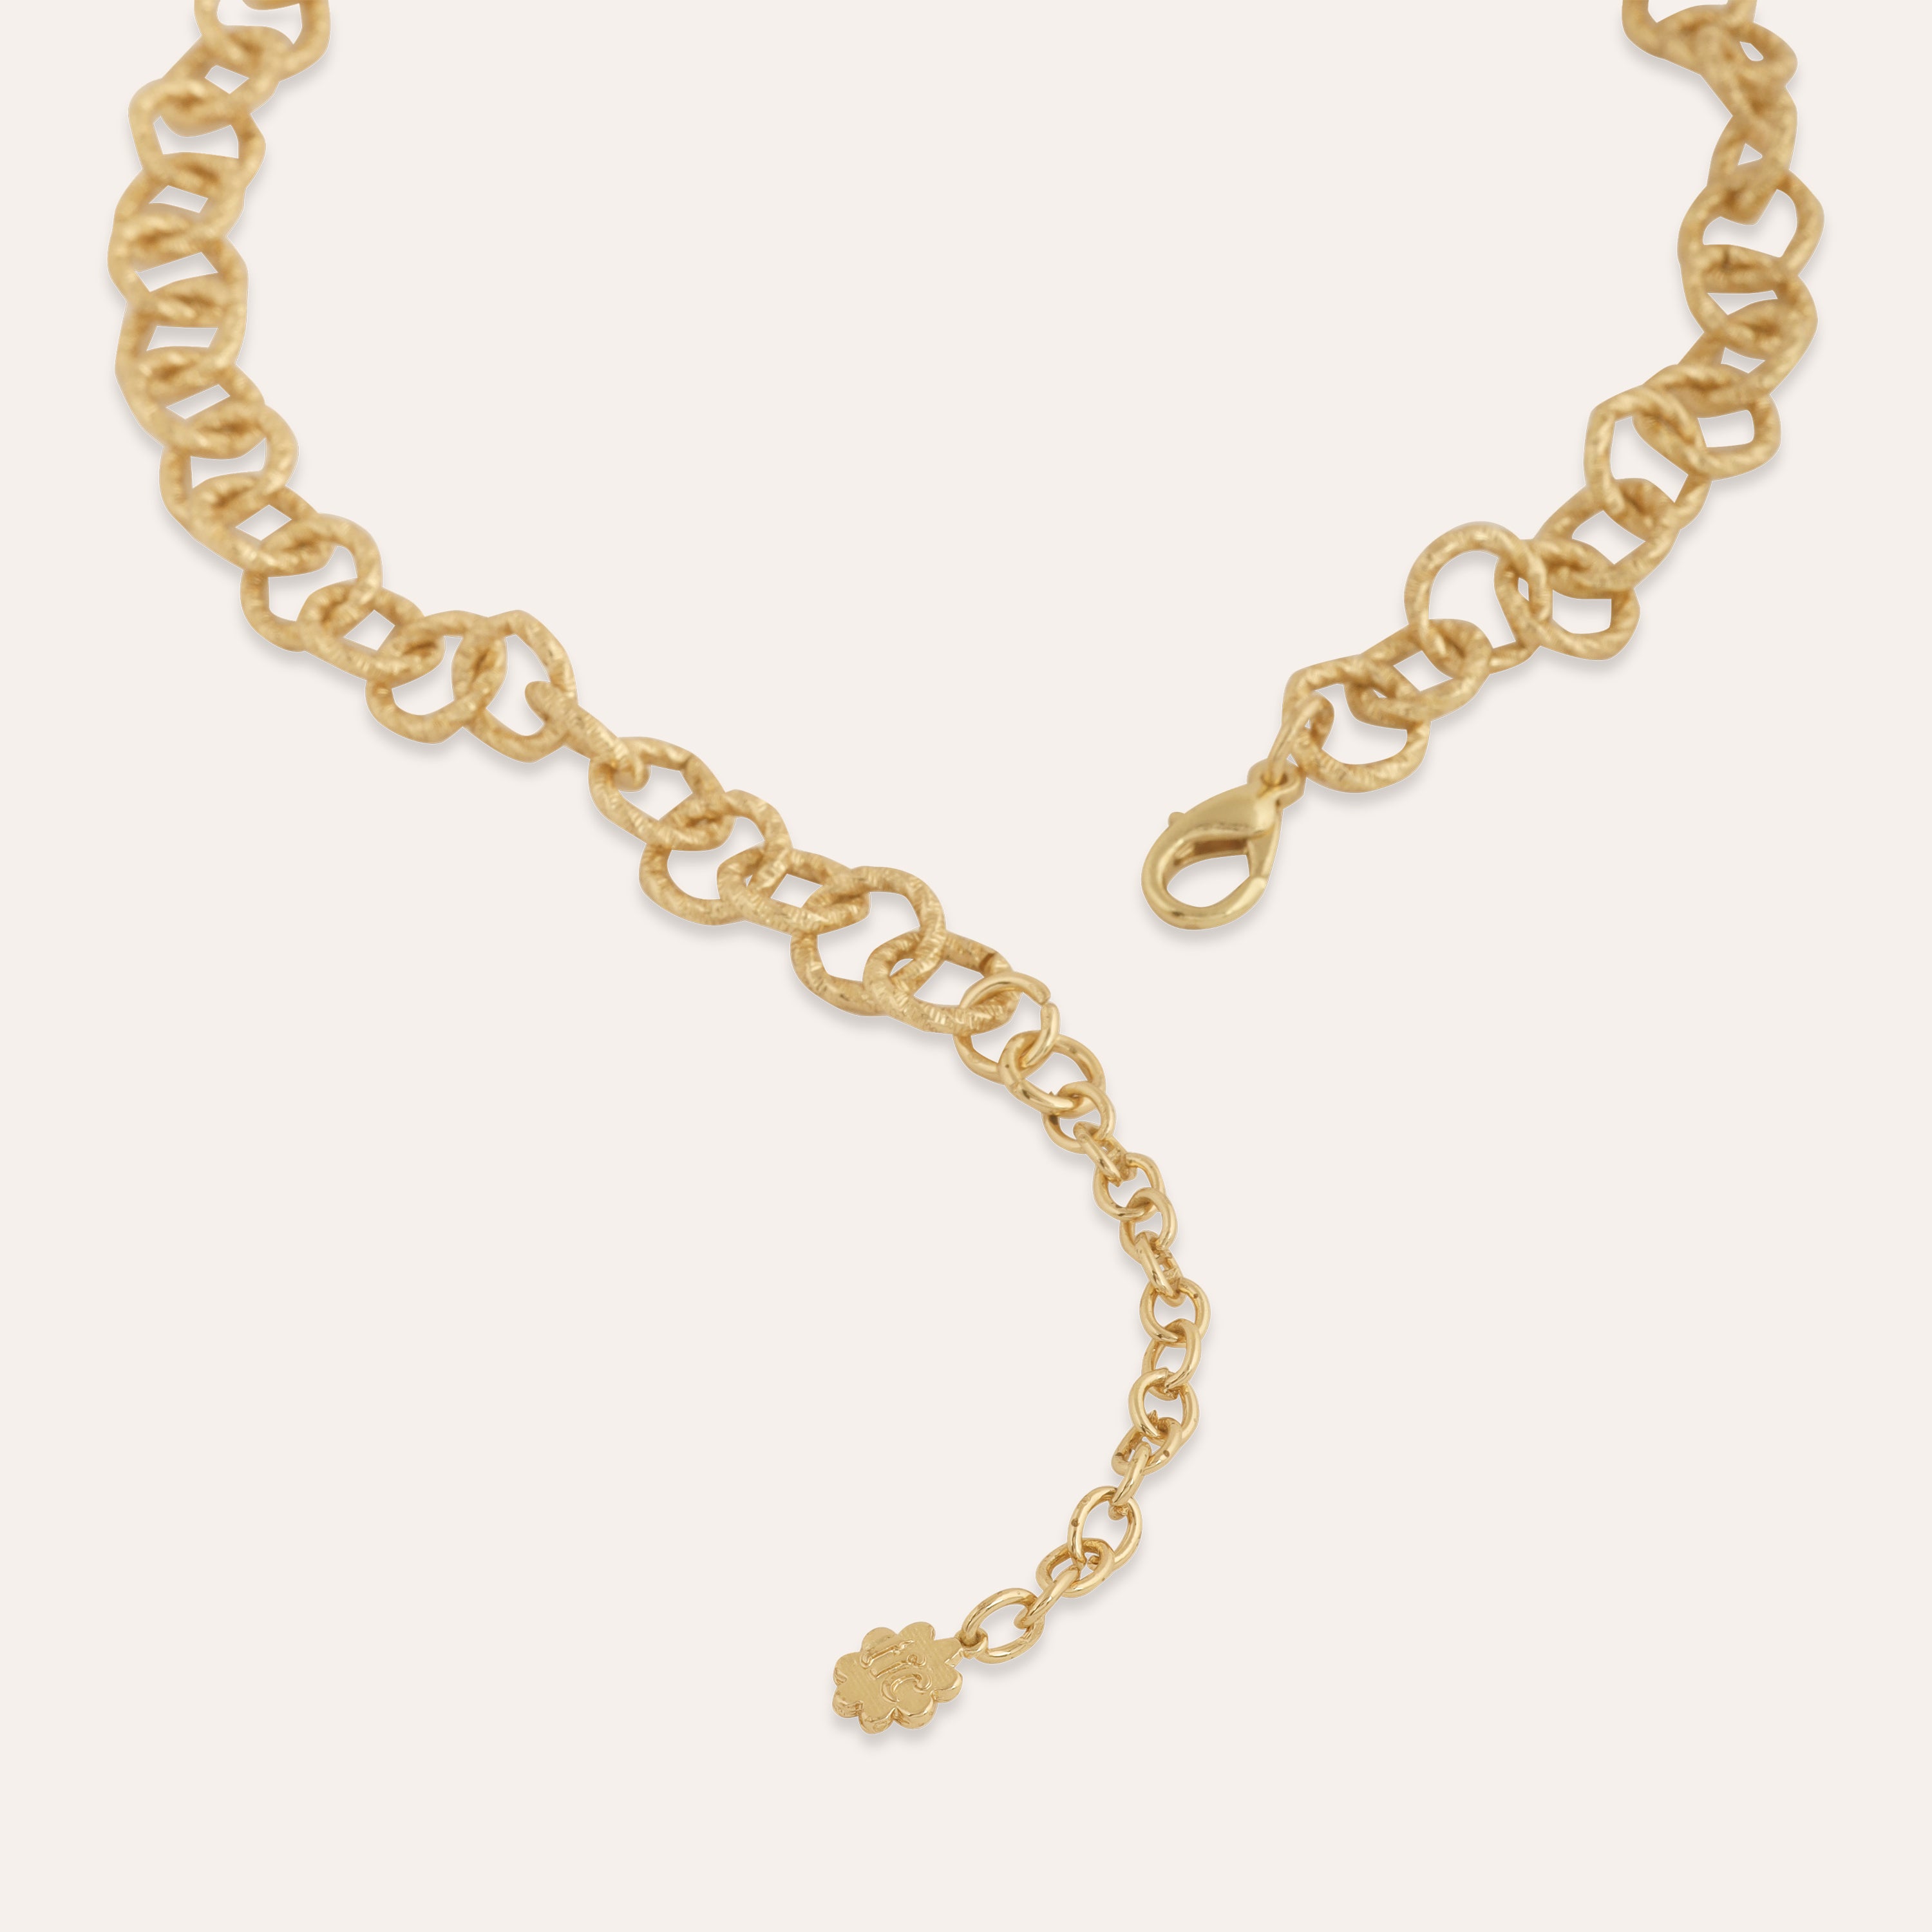 TFC Como Luxury Gold Plated Chain Necklace-Enhance your elegance with our collection of gold-plated necklaces for women. Choose from stunning pendant necklaces, chic choker necklaces, and trendy layered necklaces. Our sleek and dainty designs are both affordable and anti-tarnish, ensuring lasting beauty. Enjoy the cheapest fashion jewellery, lightweight and stylish- only at The Fun Company